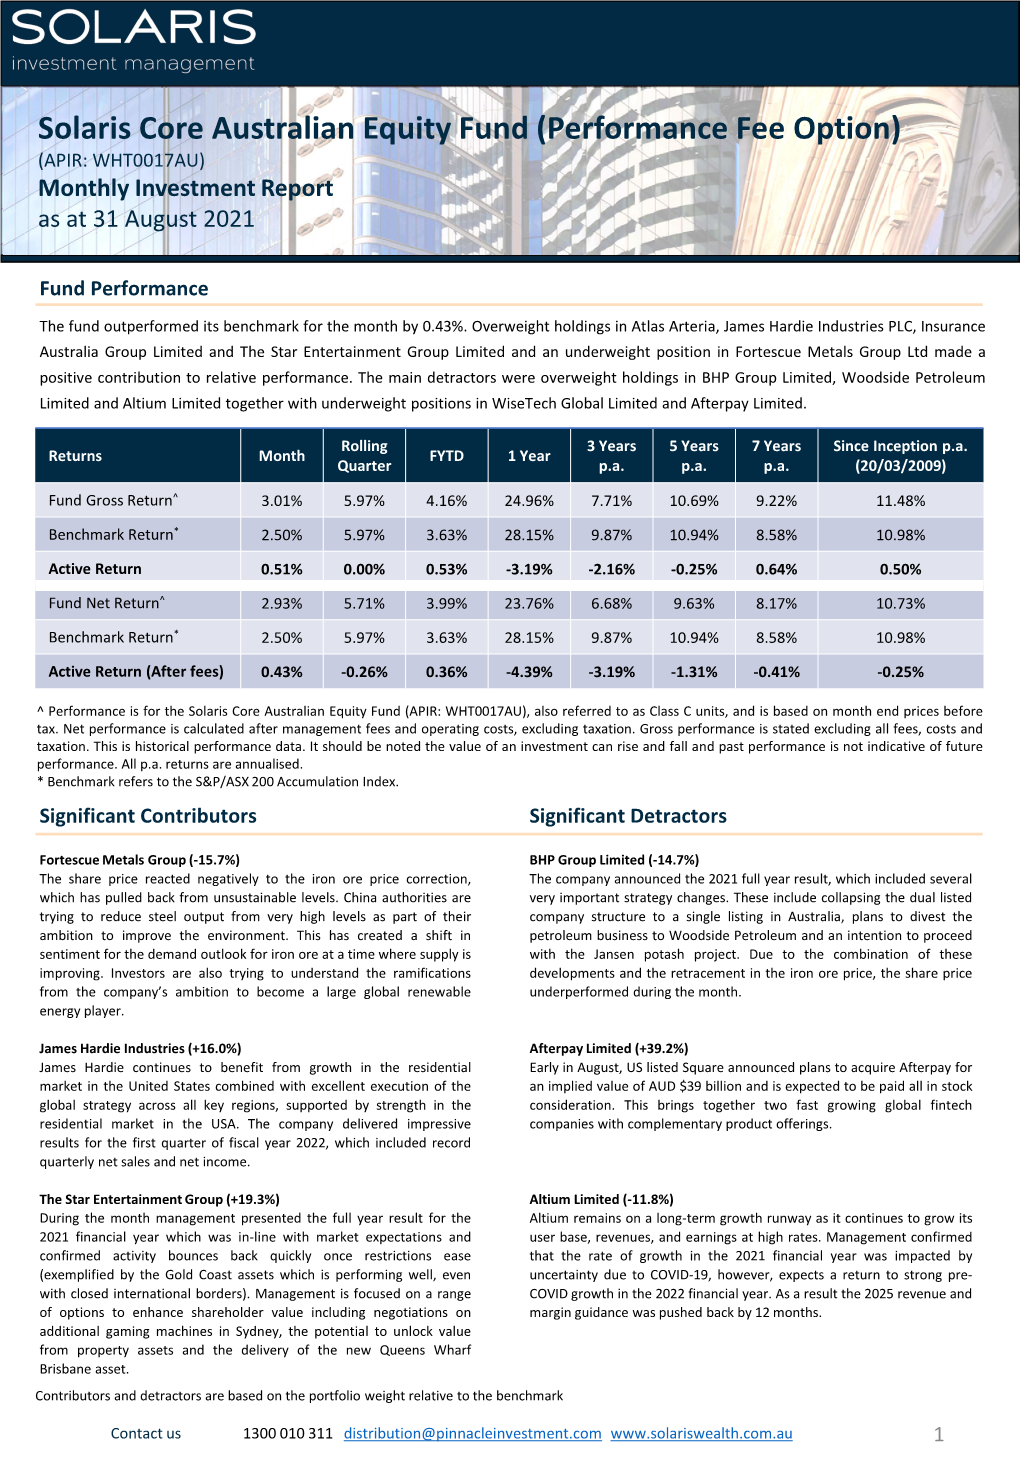 Solaris Core Australian Equity Fund (Performance Fee Option) (APIR: WHT0017AU) Monthly Investment Report As at 31 August 2021